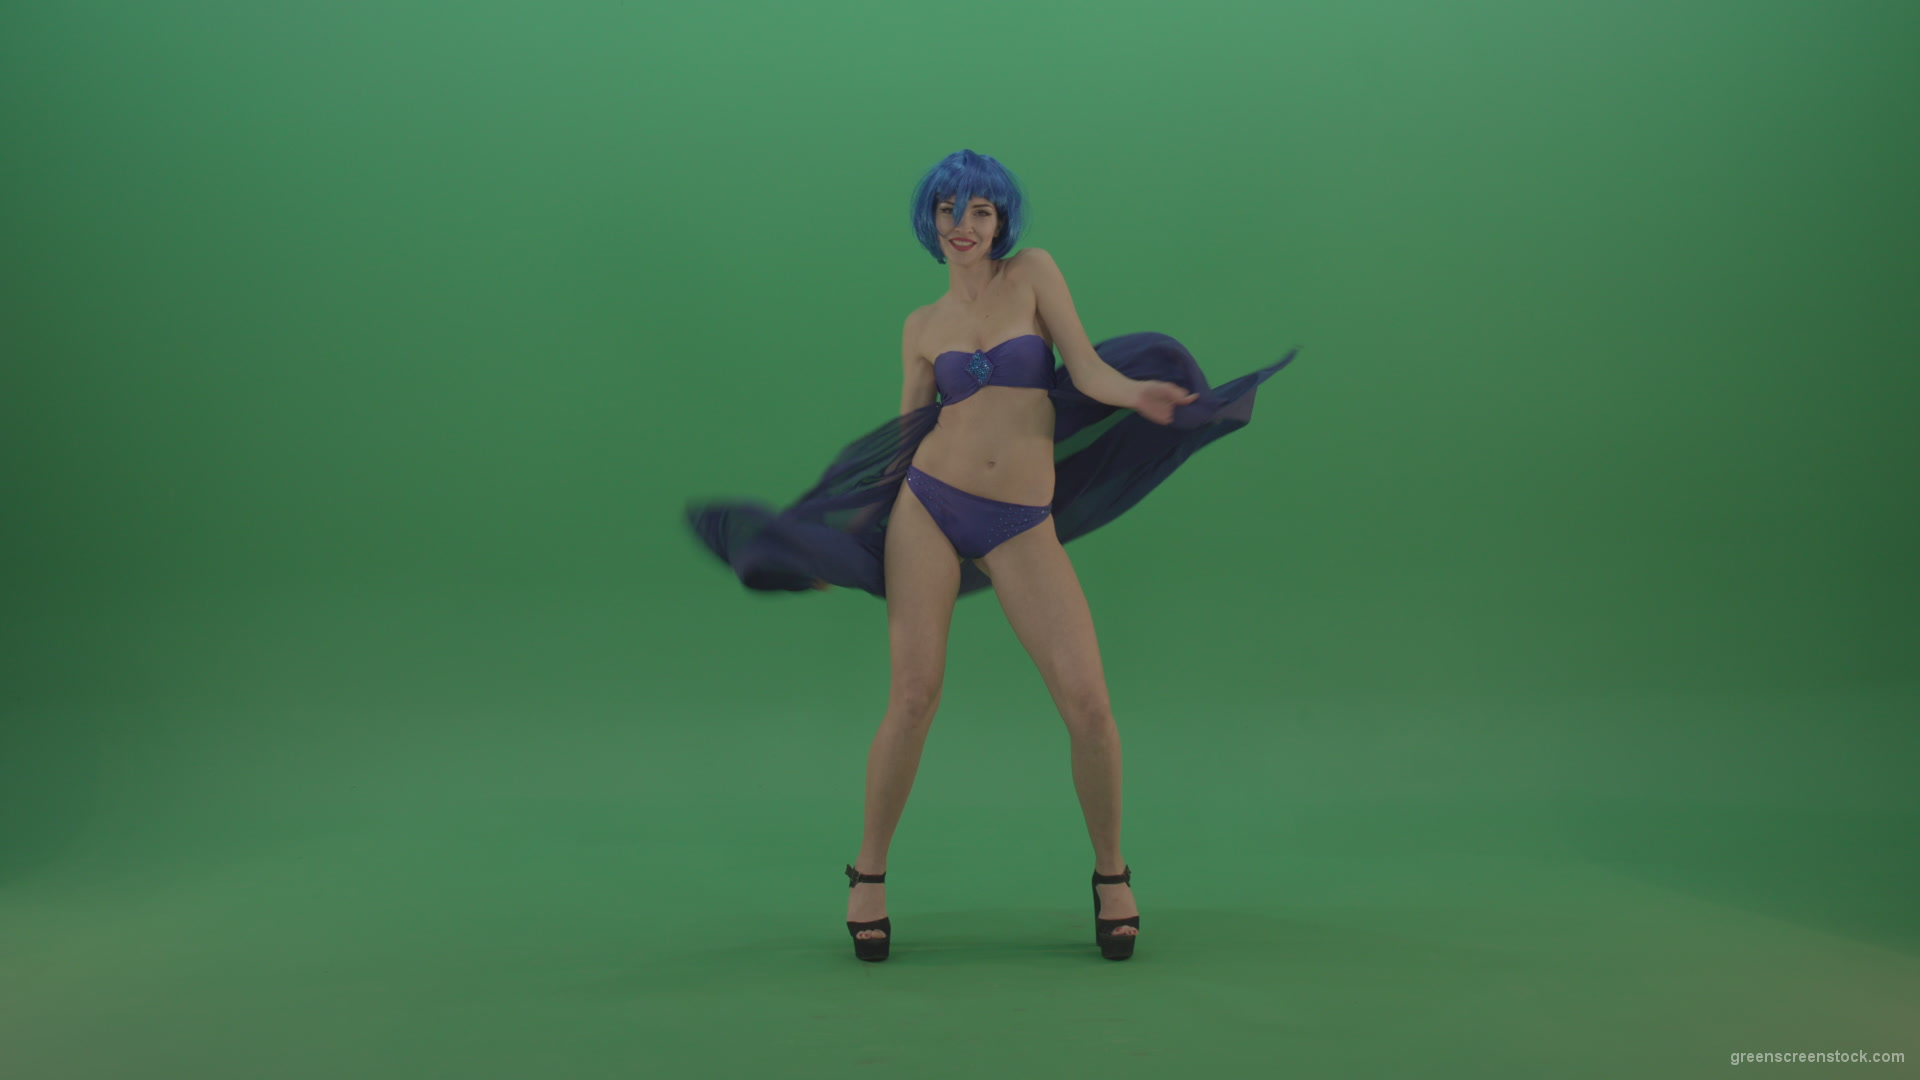 Full-size-erotic-young-girl-dancing-go-go-with-blue-dress-curtain-on-green-screen_004 Green Screen Stock